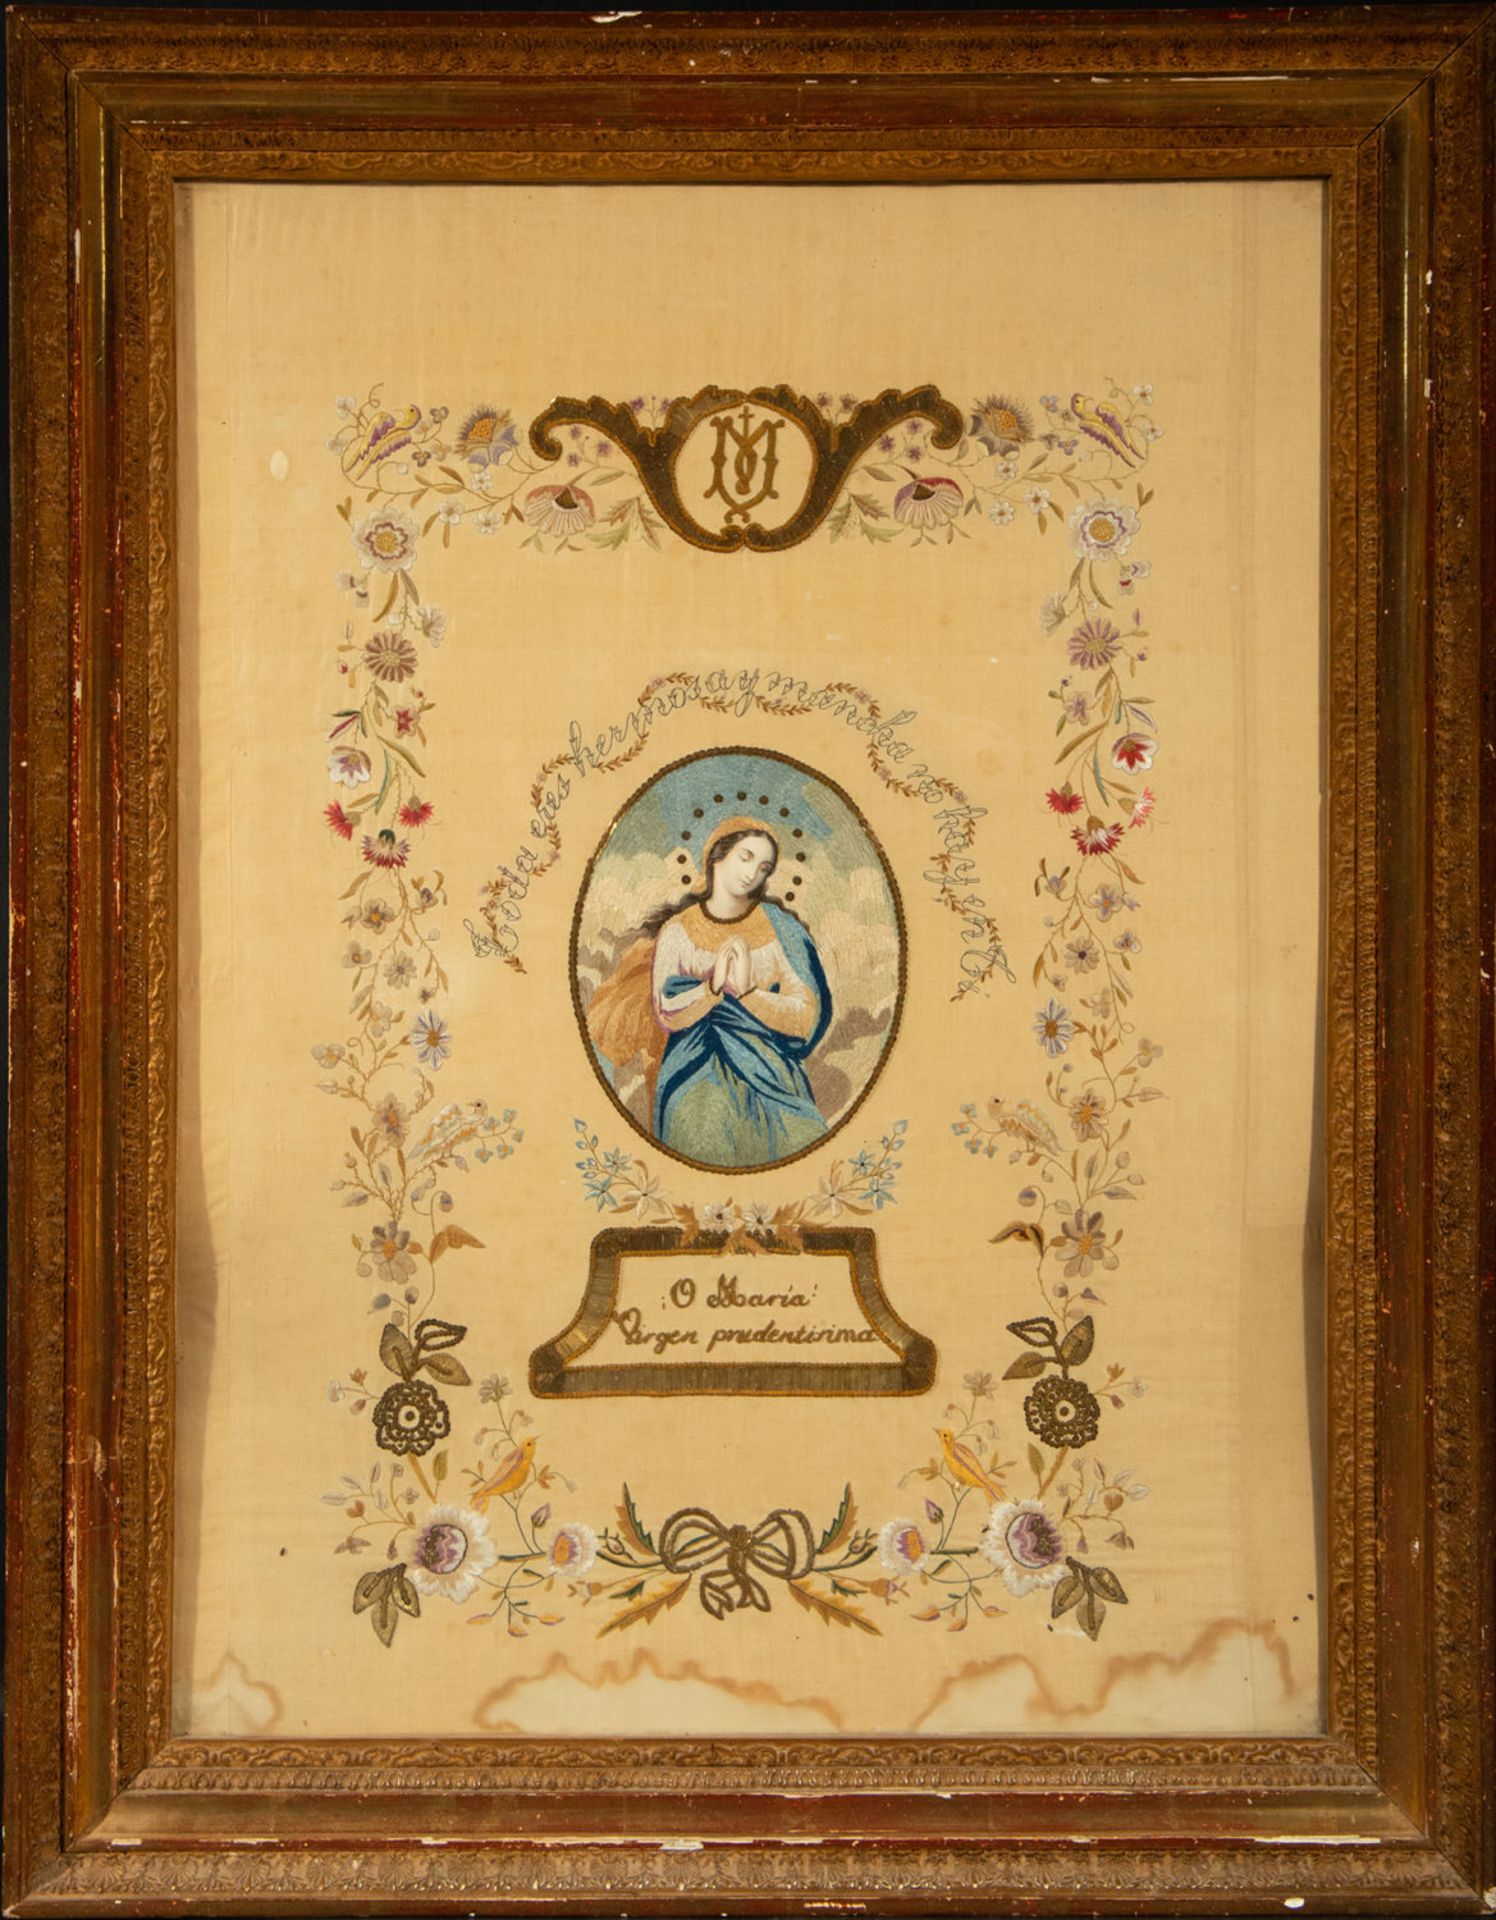 Silk embroidery of the Immaculate Virgin, 19th century Mexican school